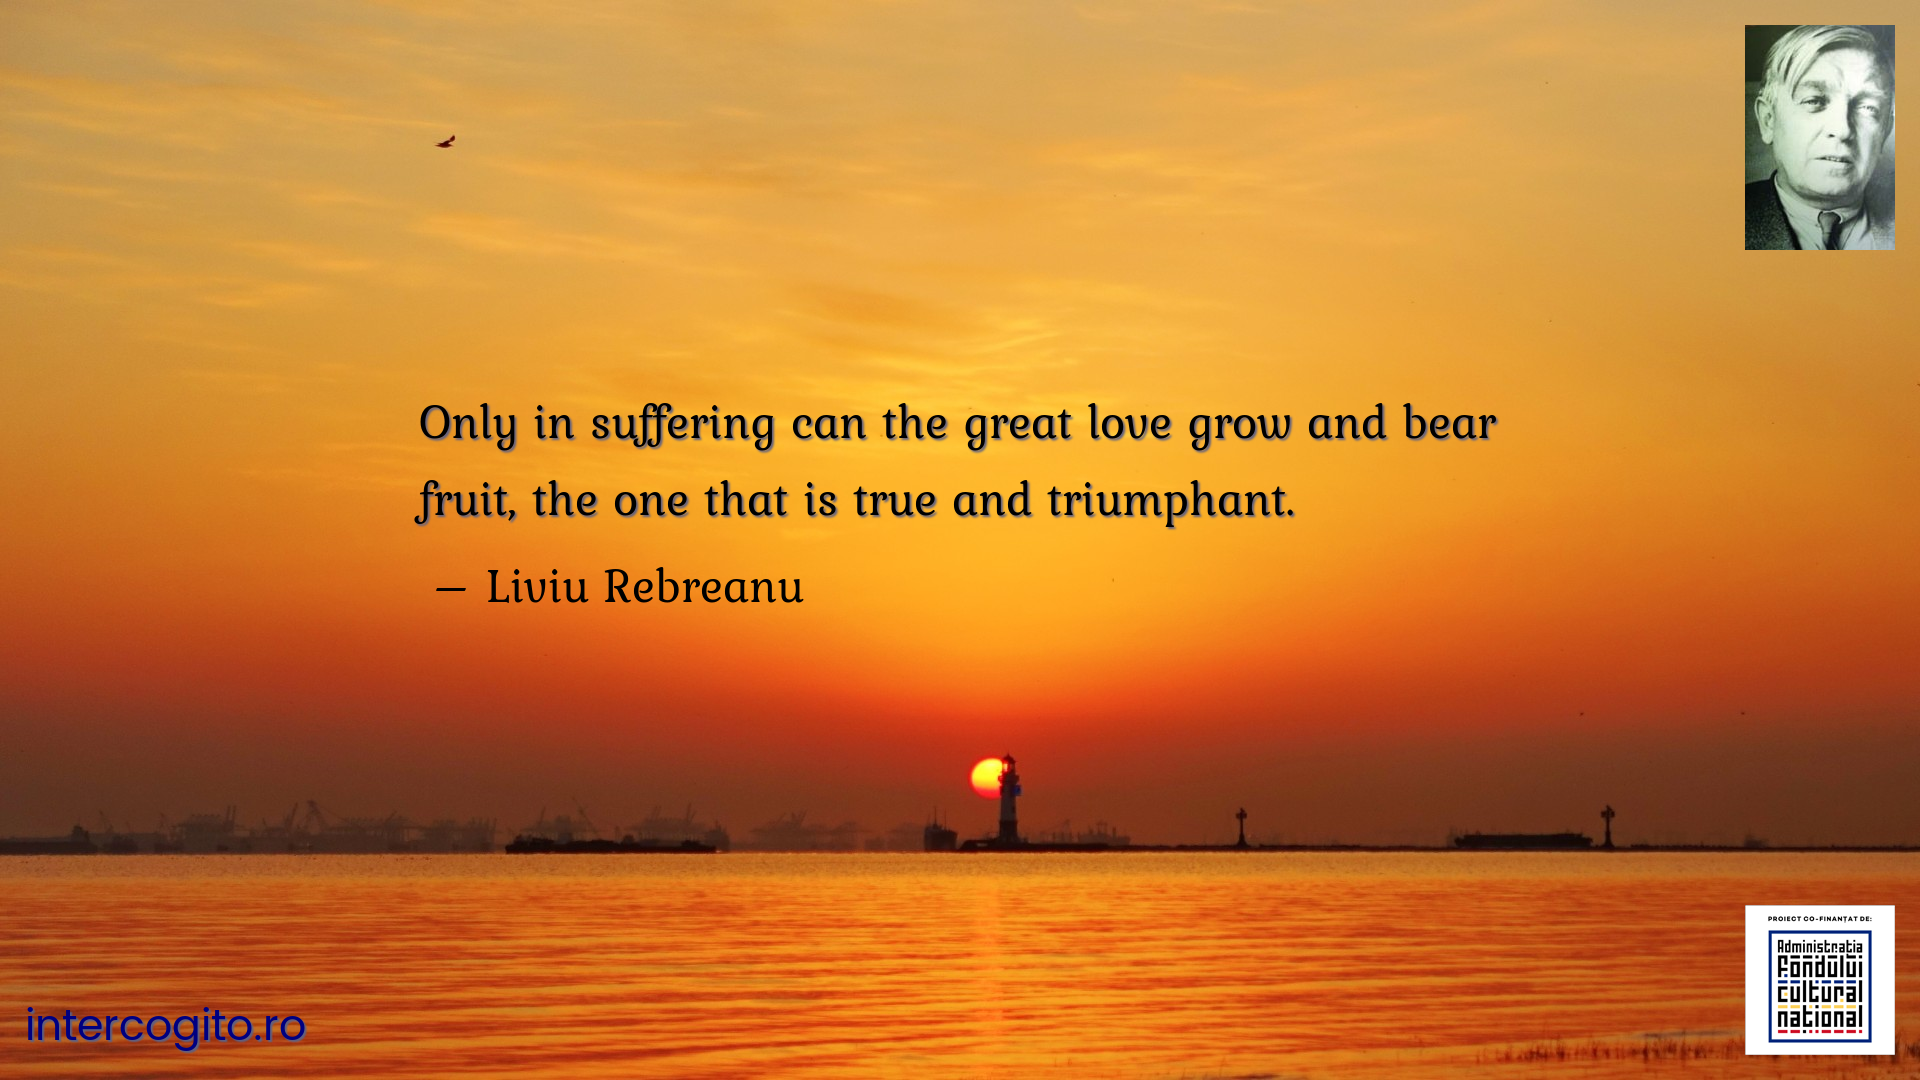 Only in suffering can the great love grow and bear fruit, the one that is true and triumphant.